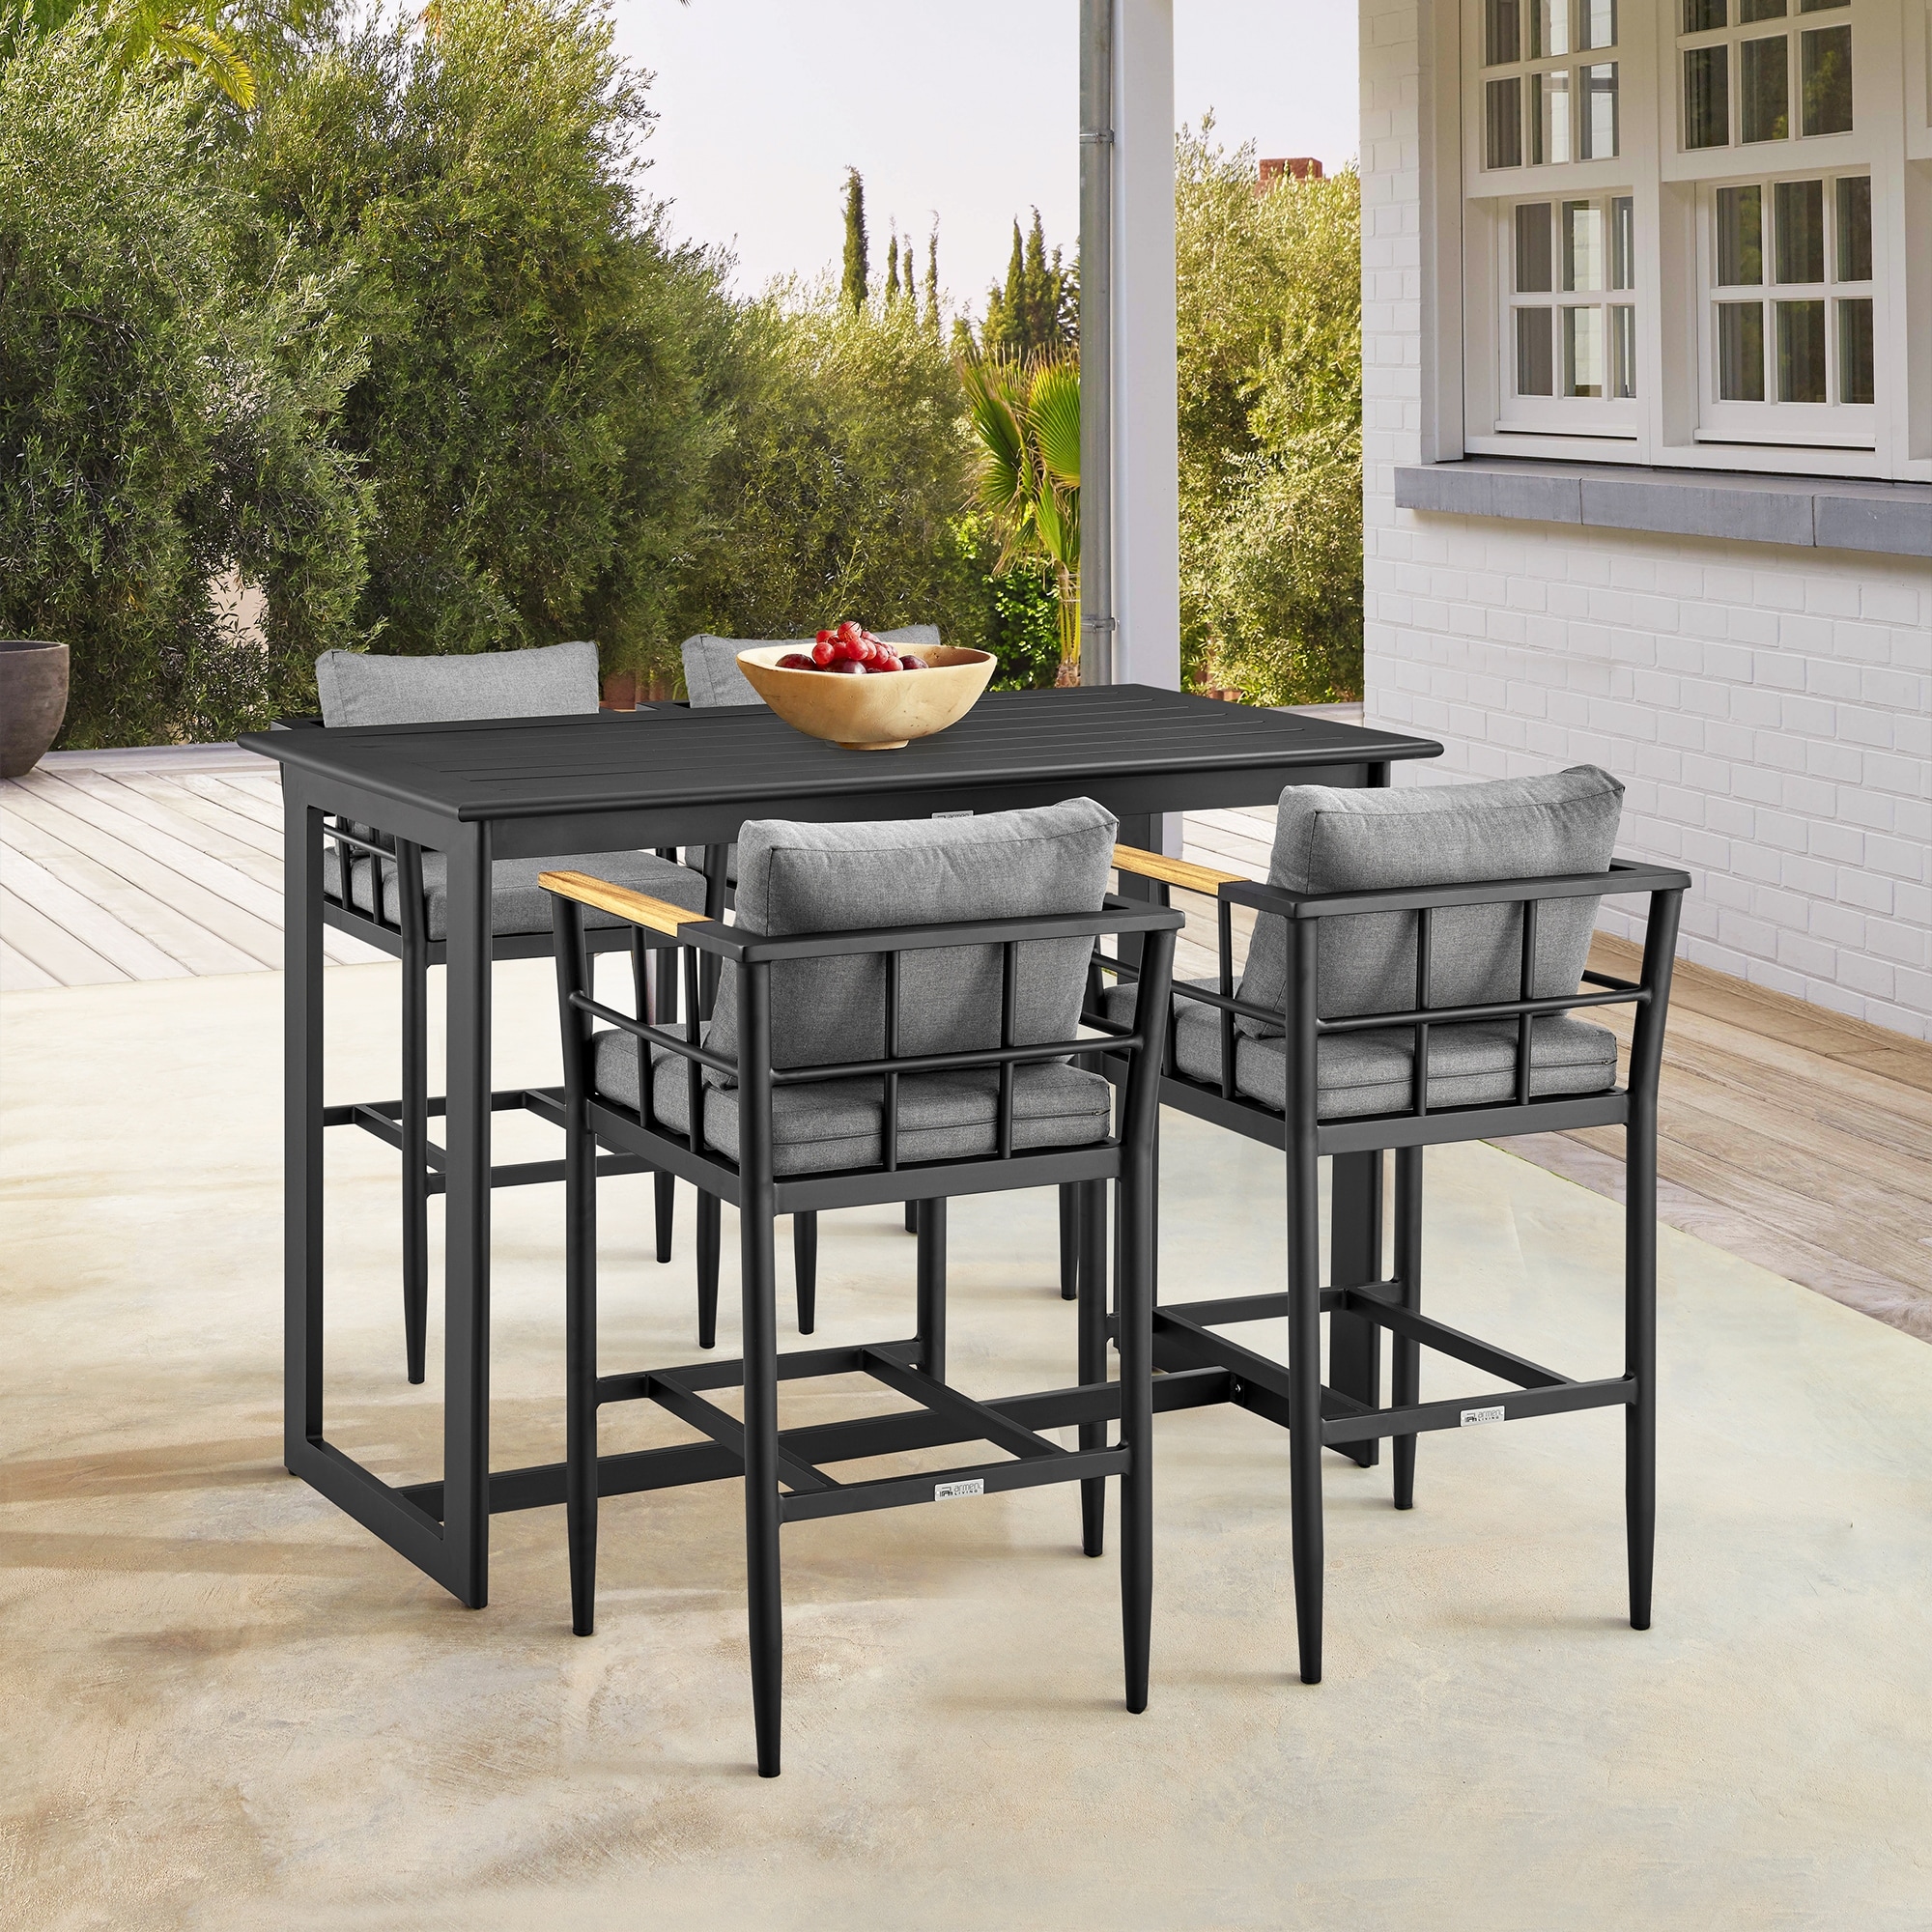 Wiglaf Outdoor Patio 5-piece Bar Table Set In Aluminum With Grey Cushions